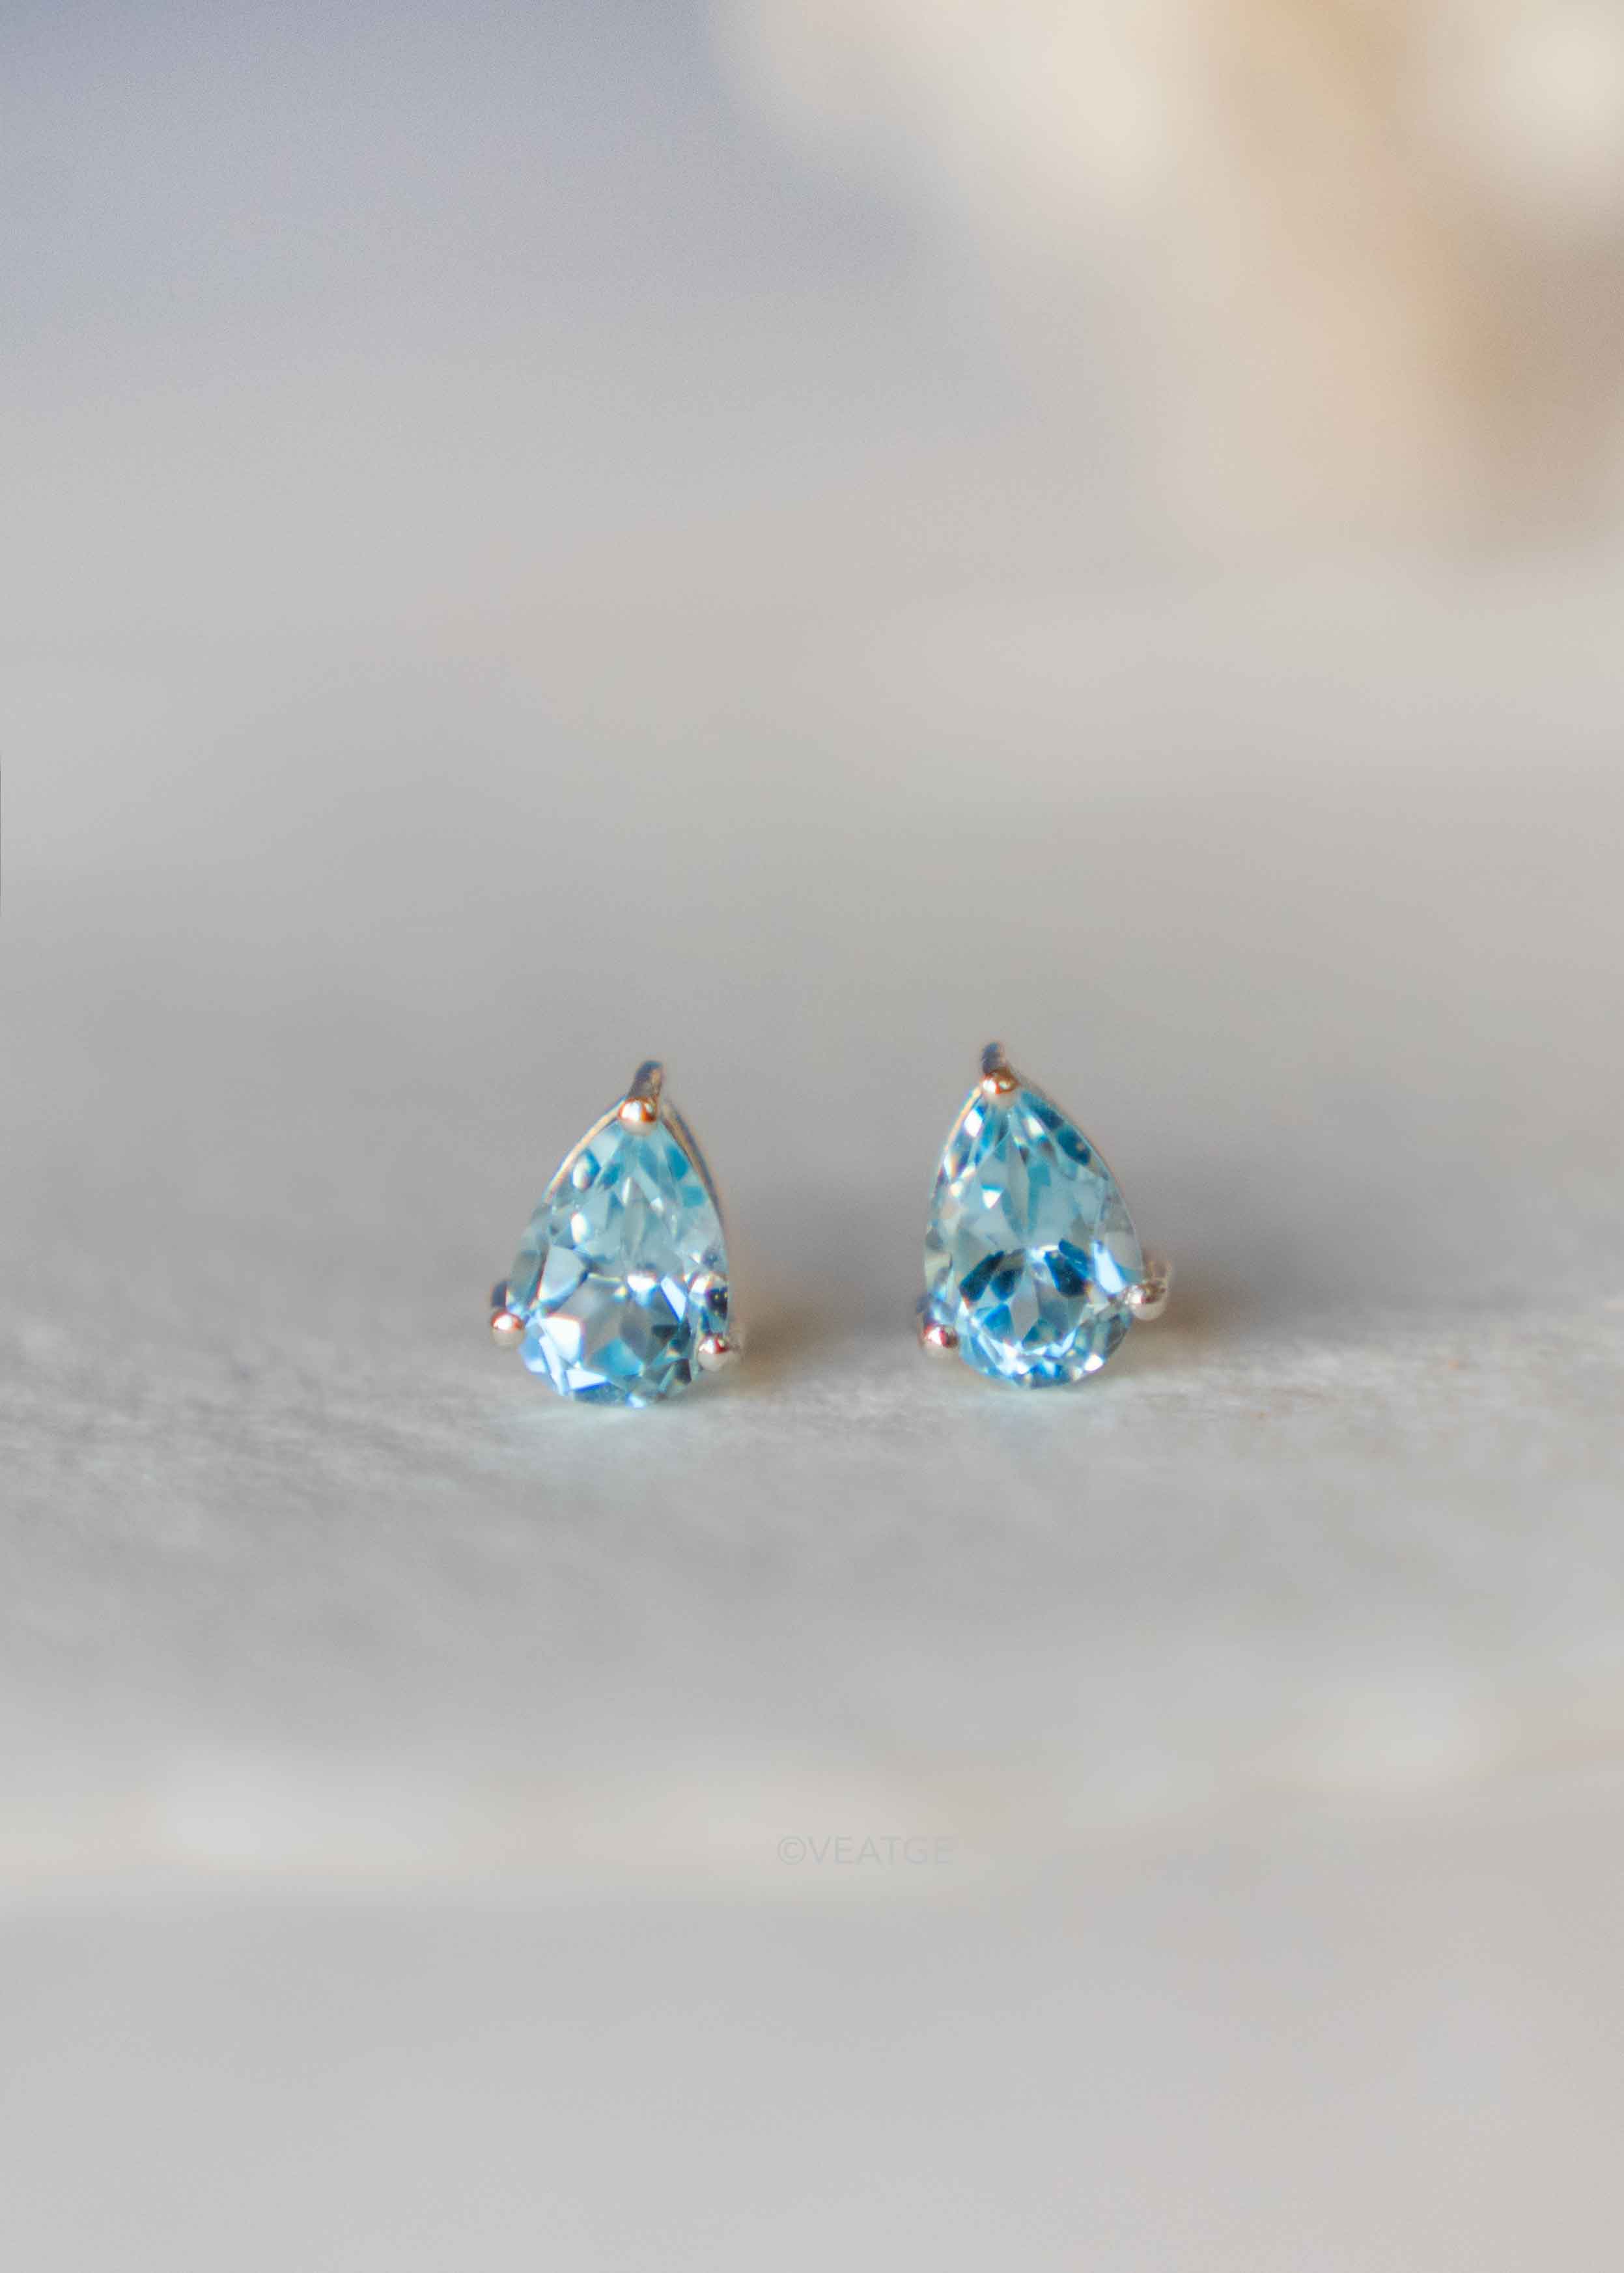 Swiss Blue Topaz Pear Stud Earrings Cartilage Piercing Statement Studs Gifts for Women Gifts for Girls